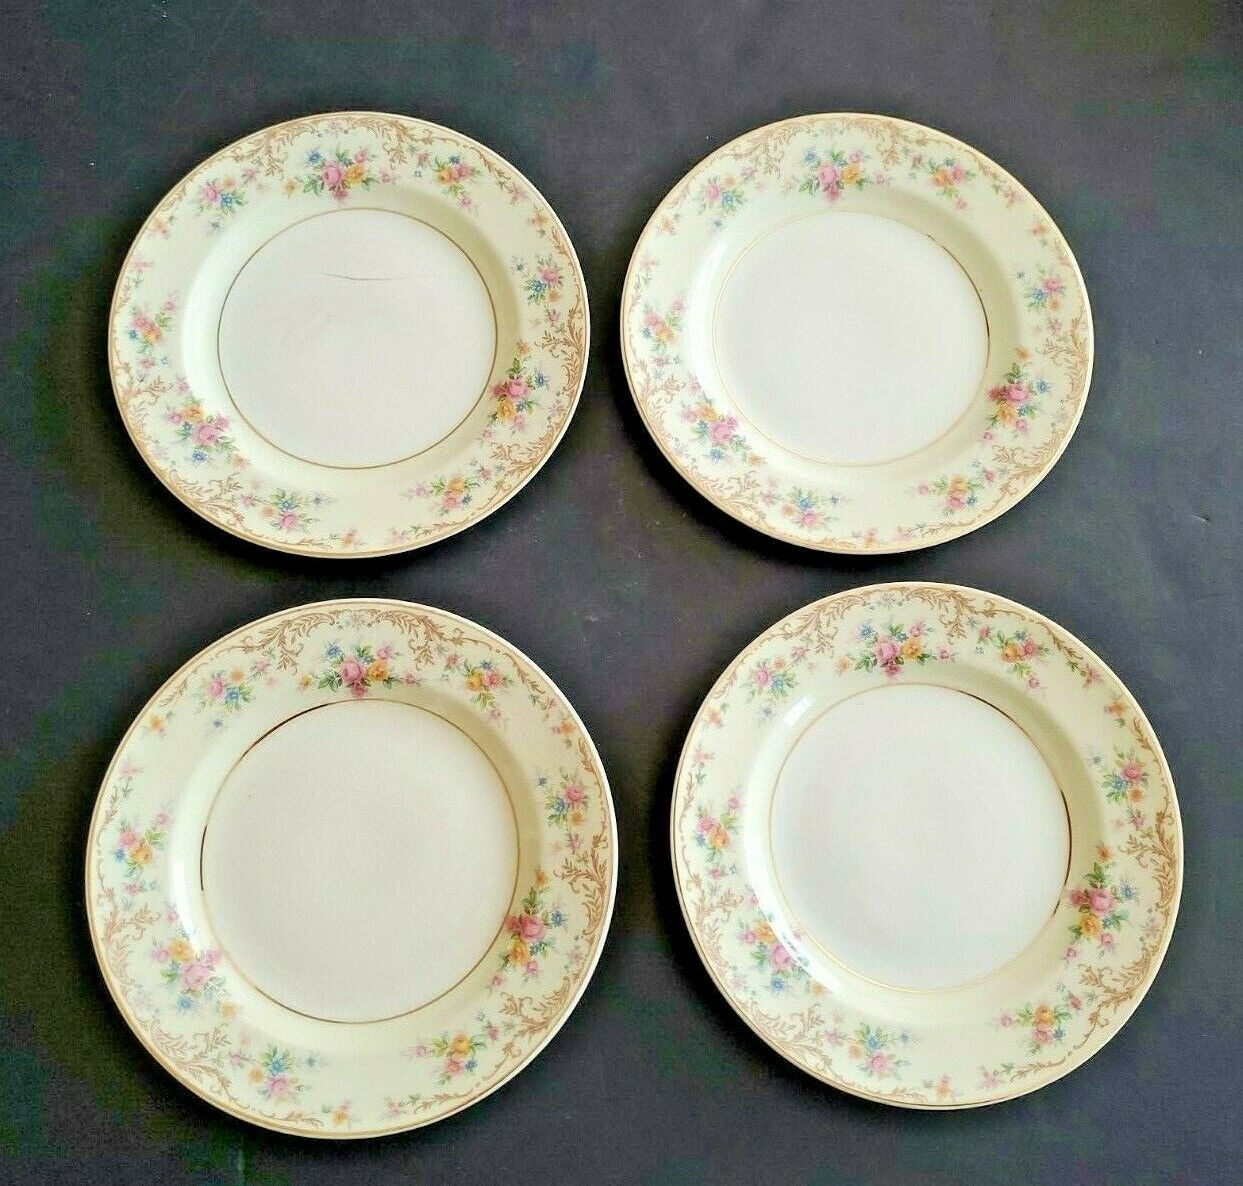 Lot Of 4 Vintage Steubenville China 6" Bread & Butter Plates - Ivory & Floral